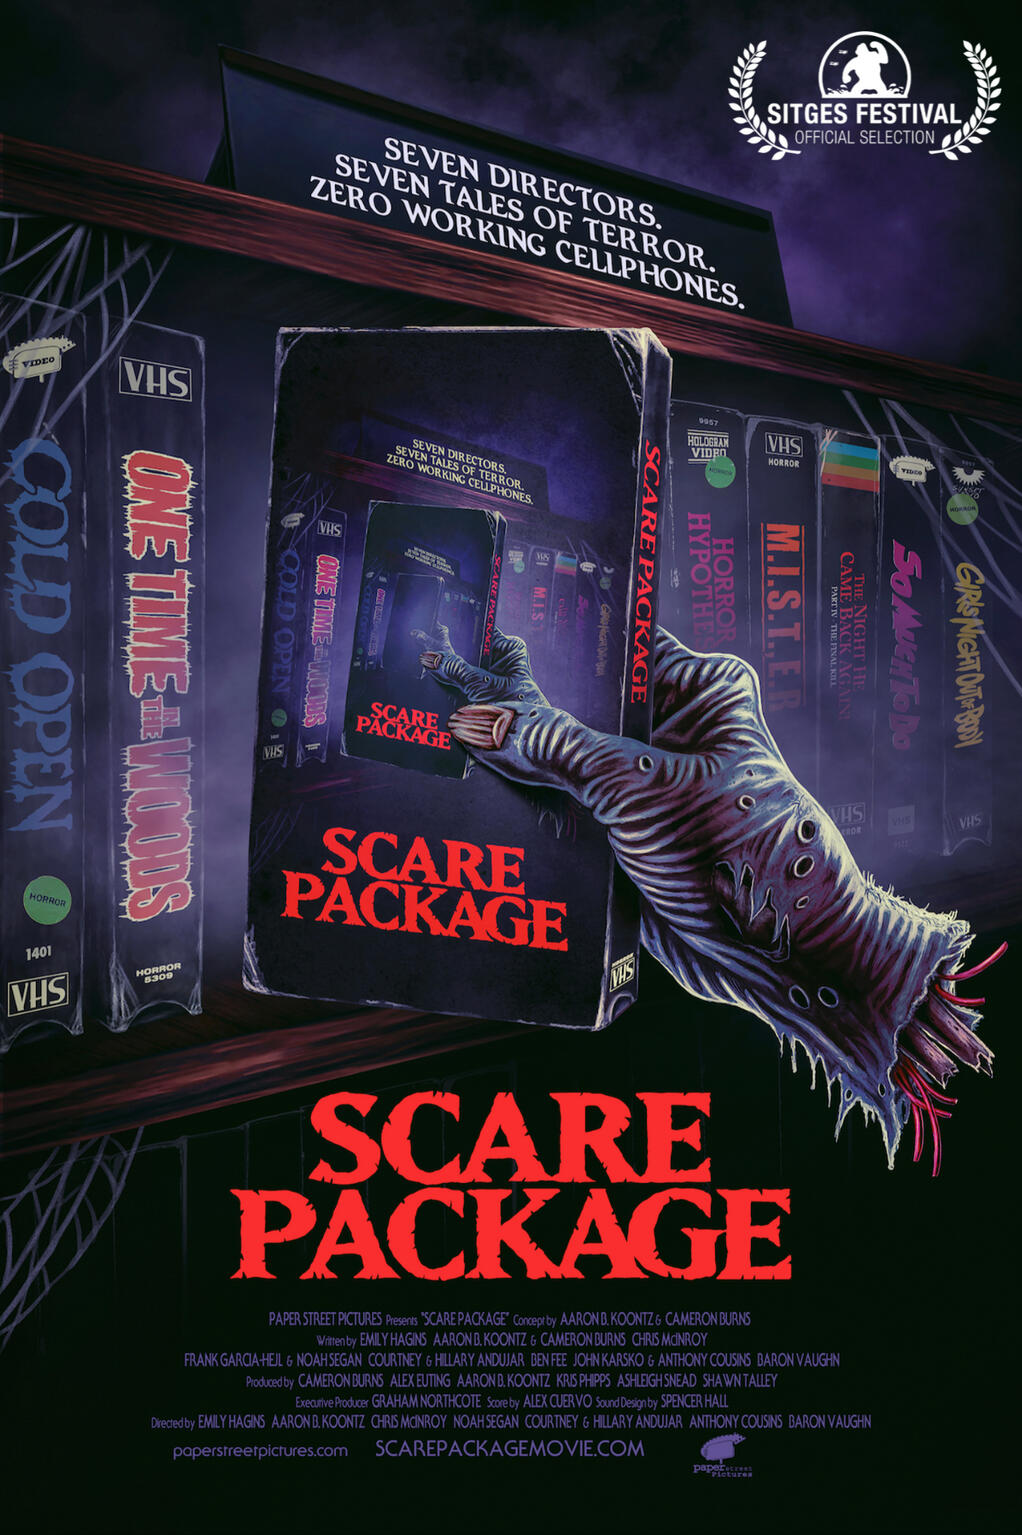 Scare Package review: Anthology of horror